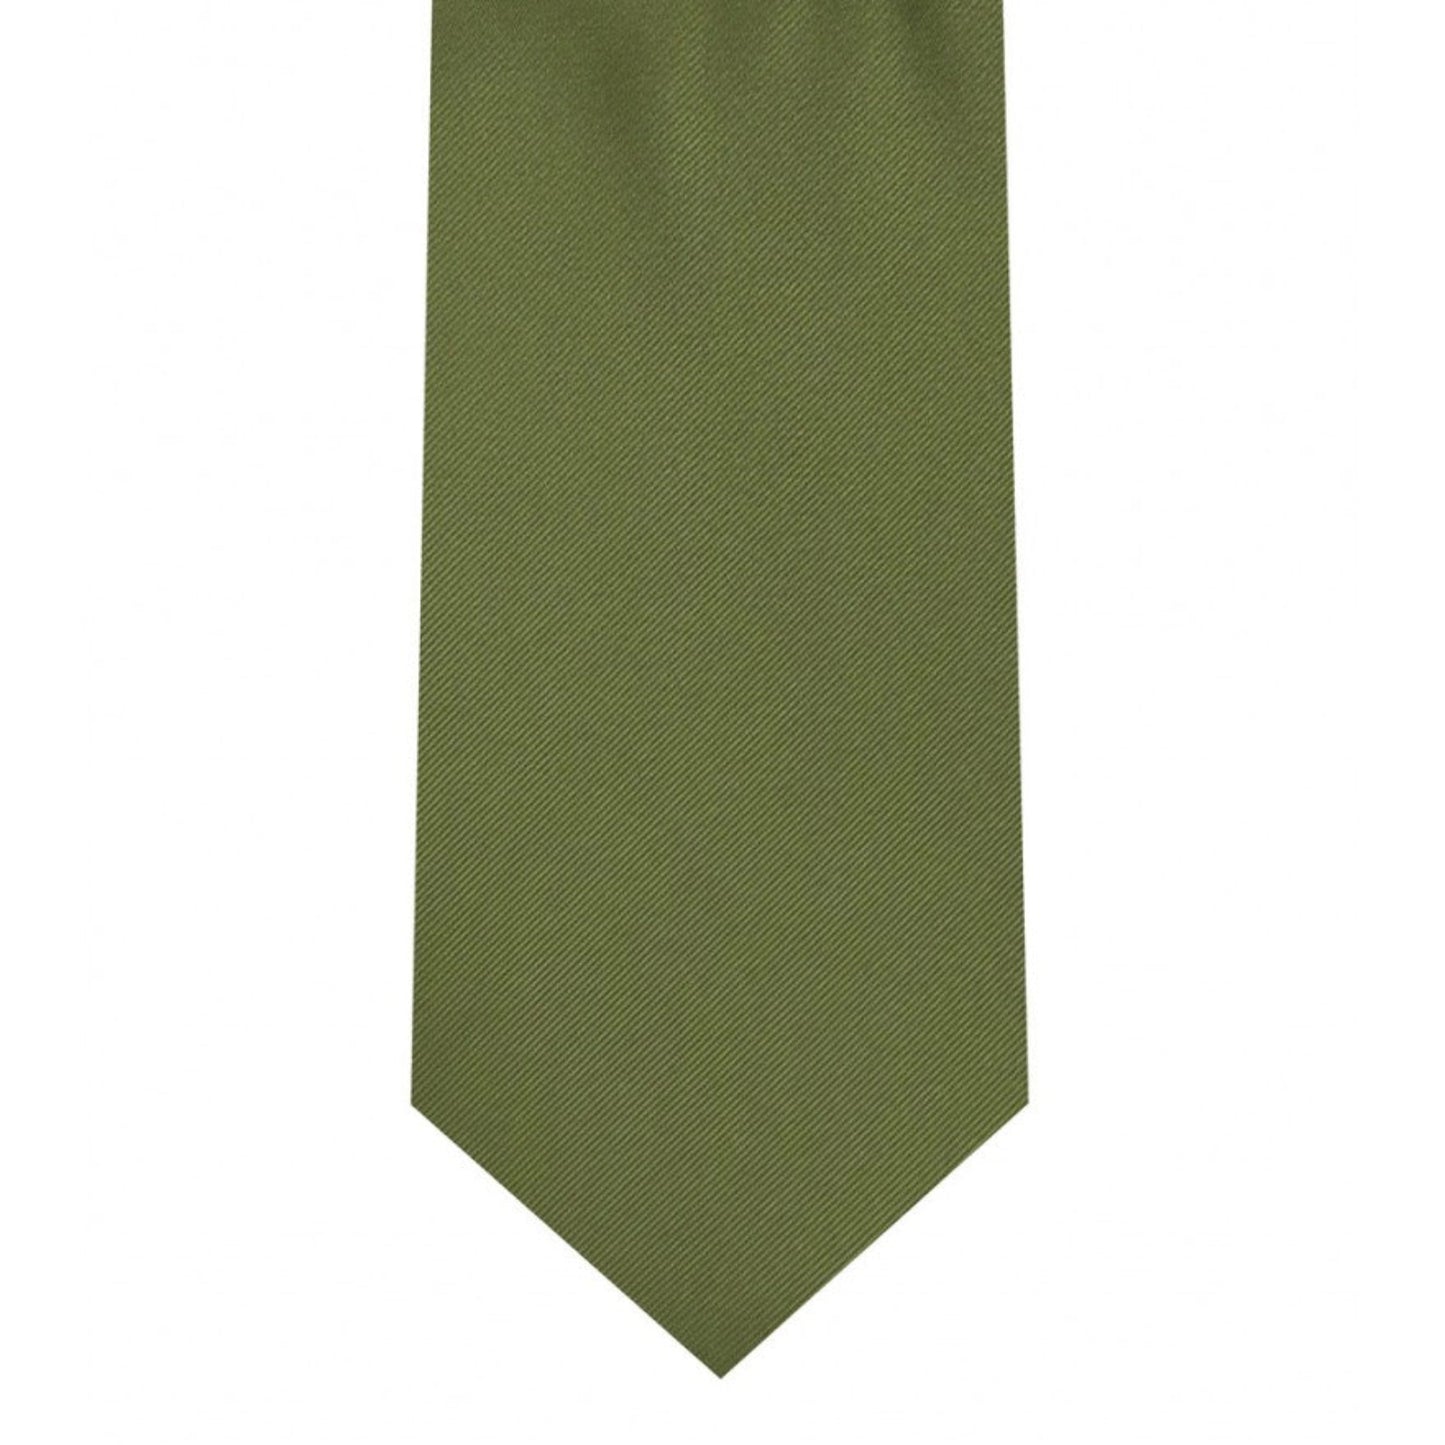 Classic Dark Olive Tie Skinny width 2.75 inches With Matching Pocket Square | KCT Menswear